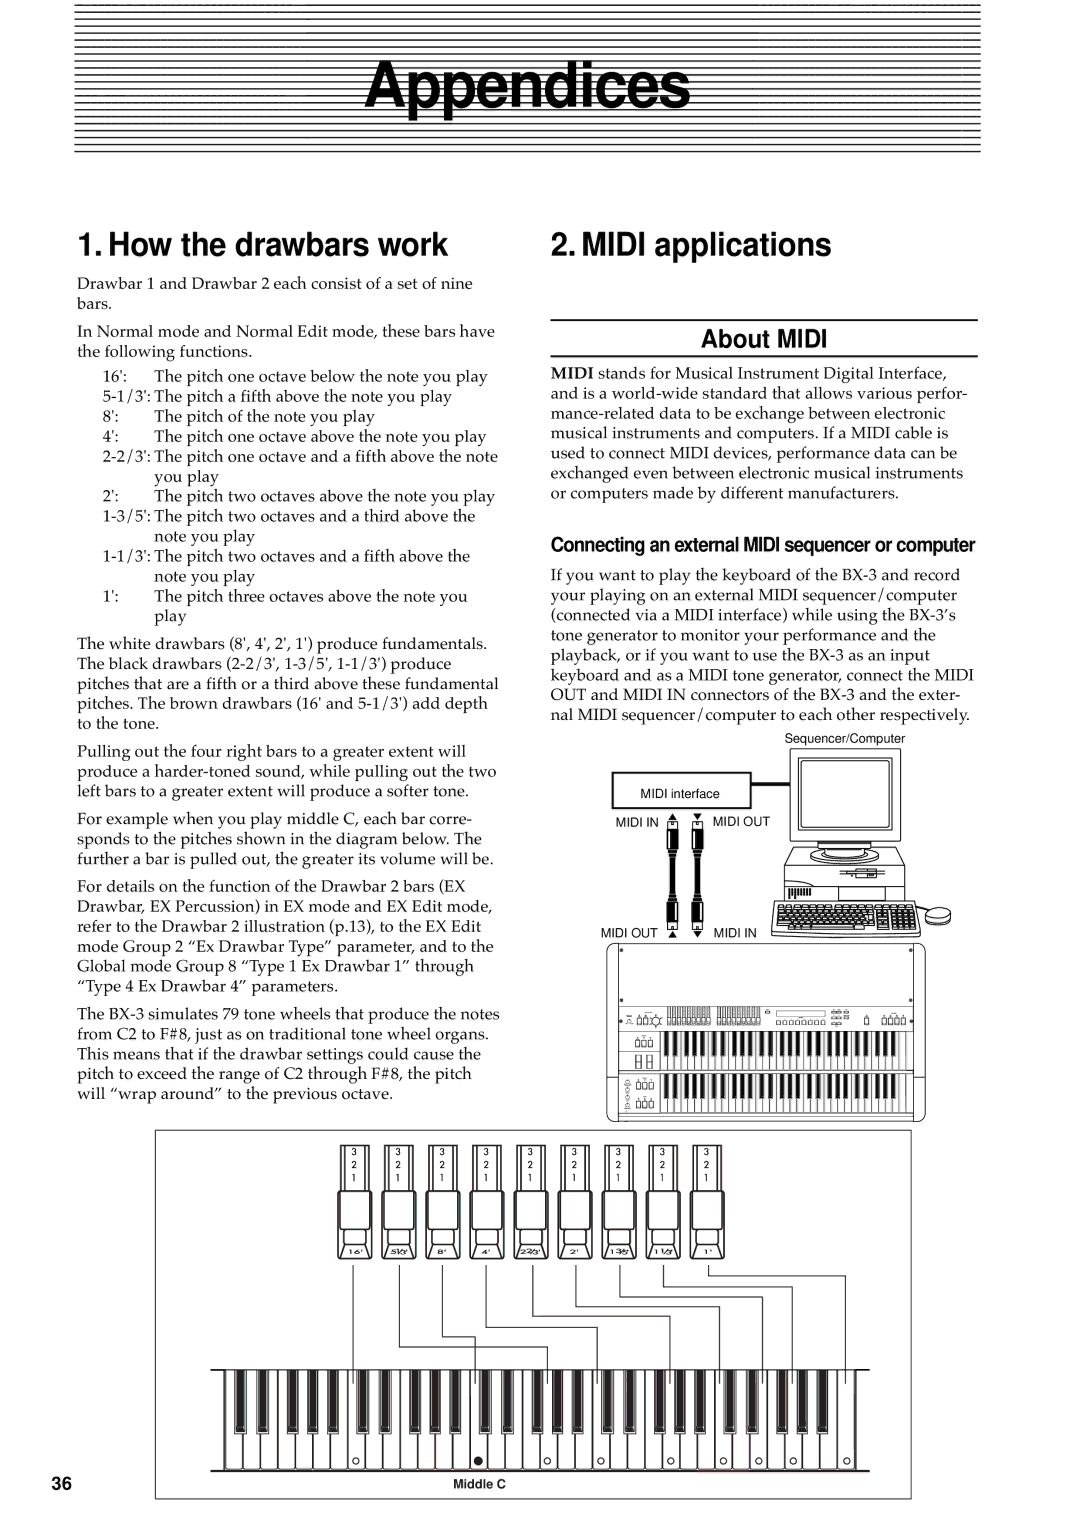 Korg BX-3 manual How the drawbars work, About Midi, Connecting an external Midi sequencer or computer 